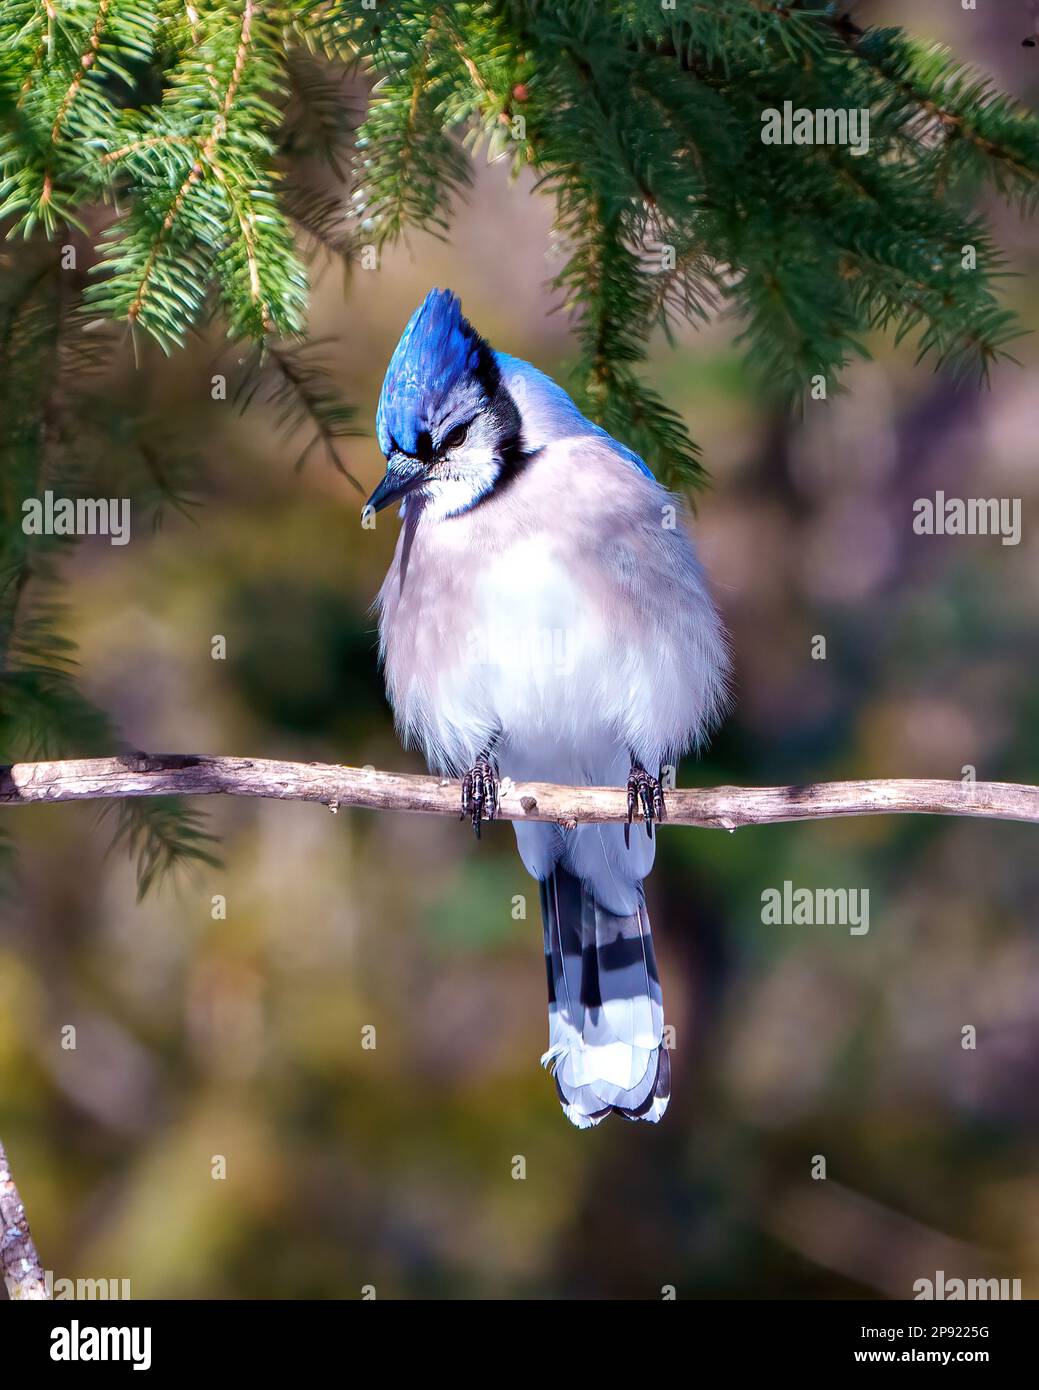 Blue Jay profile front view perched on a branch displaying blue colour feather plumage with blur forest background in its environment and habitat. Stock Photo